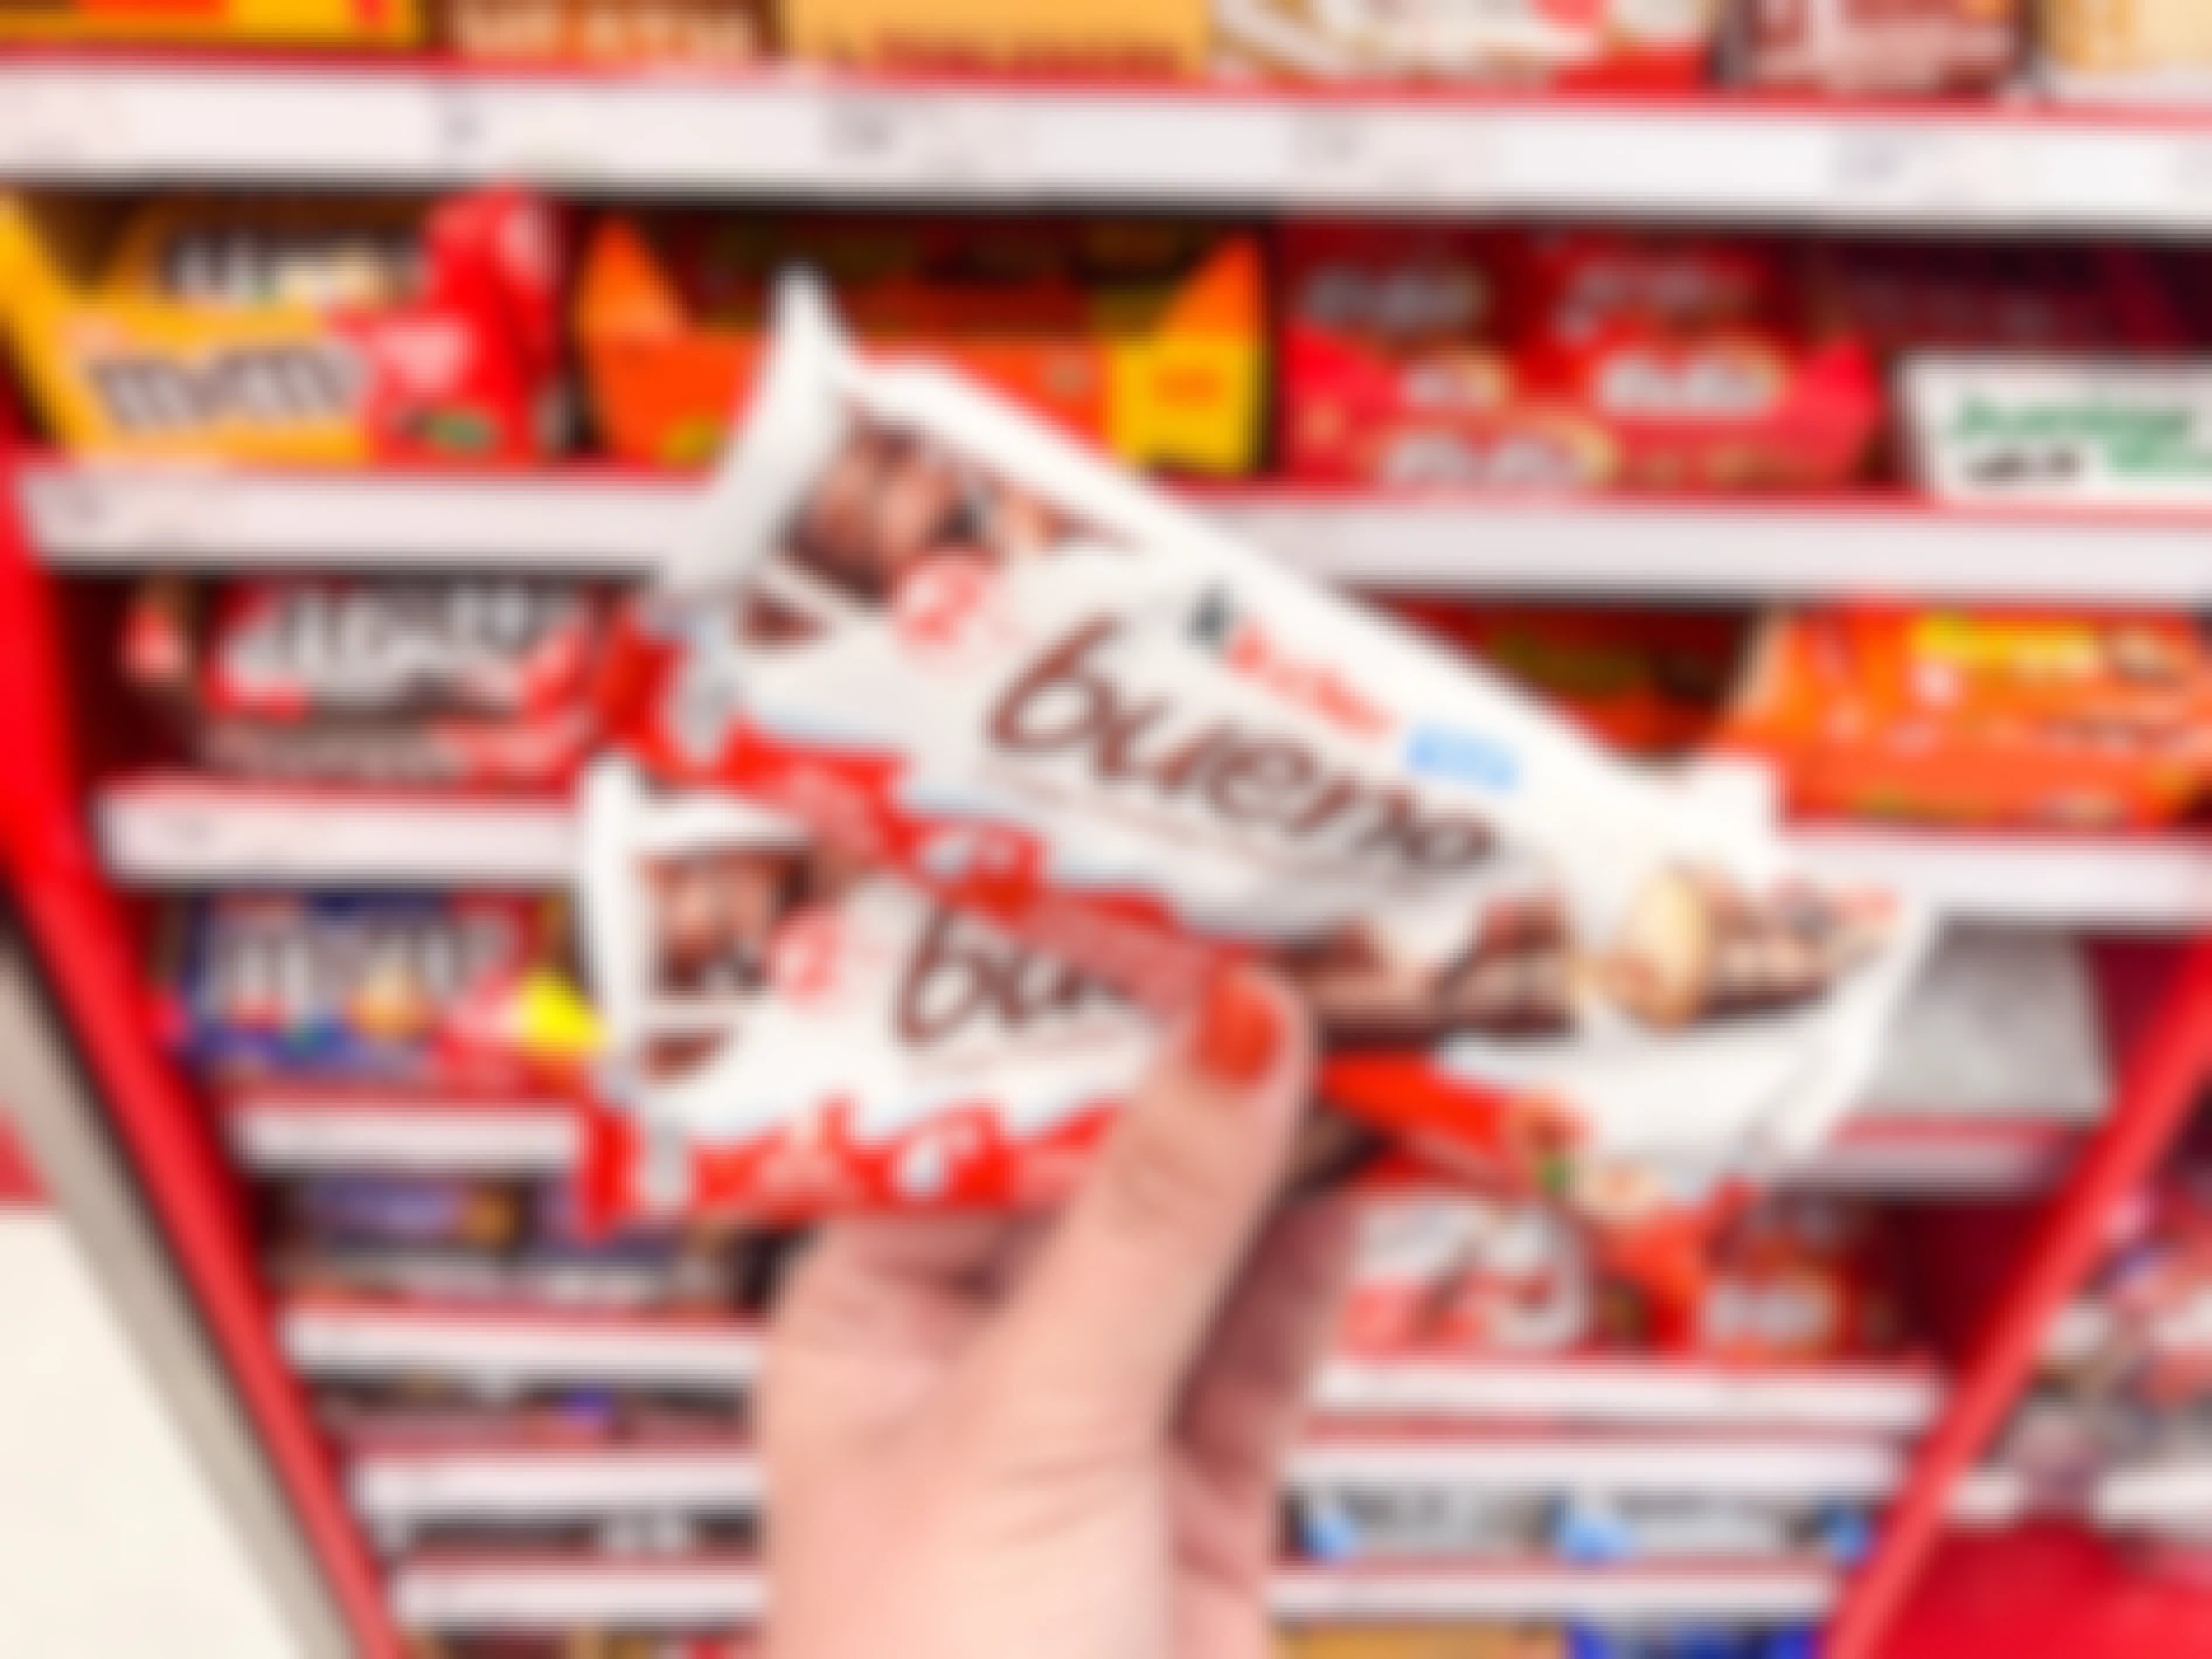 Kinder Chocolate Is Finally Coming to the U.S. Starting in August